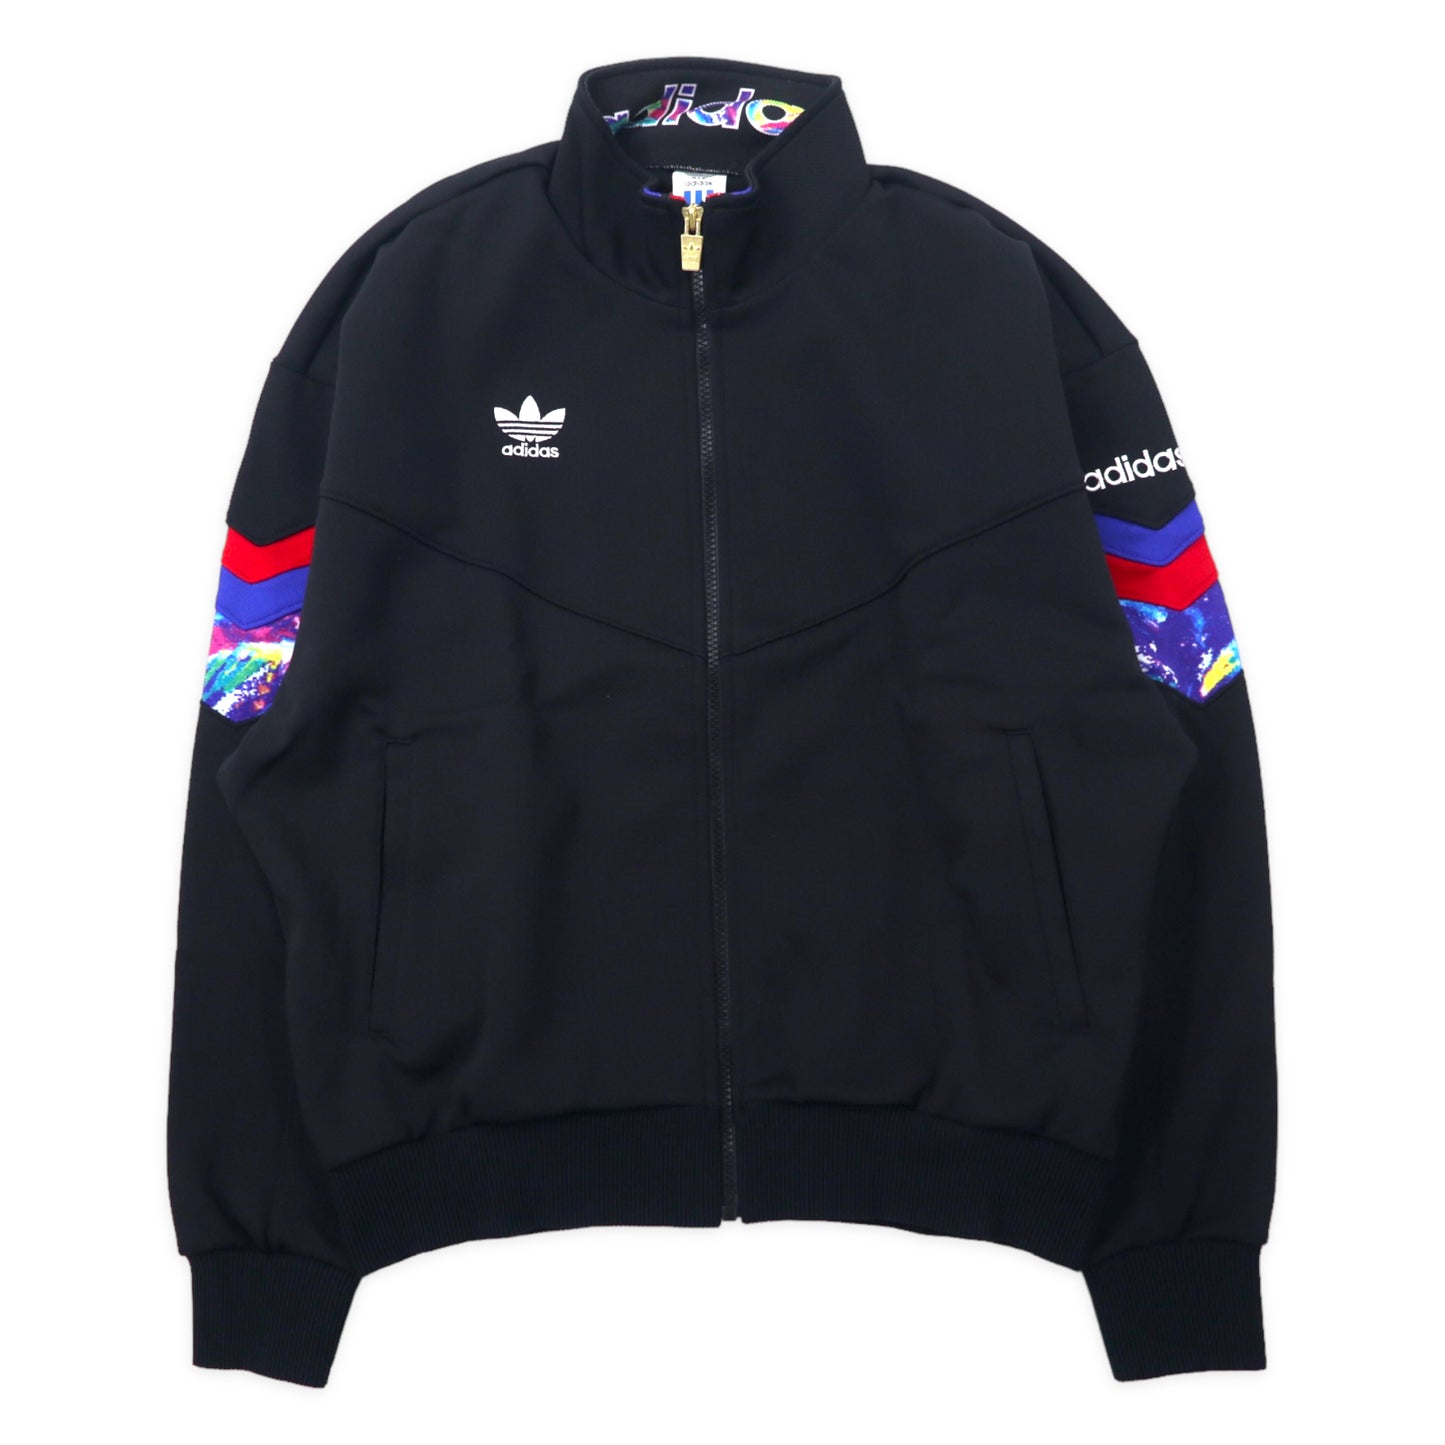 Adidas 90's Descente MADE TRACK JACKET Jersey L Black Polyester